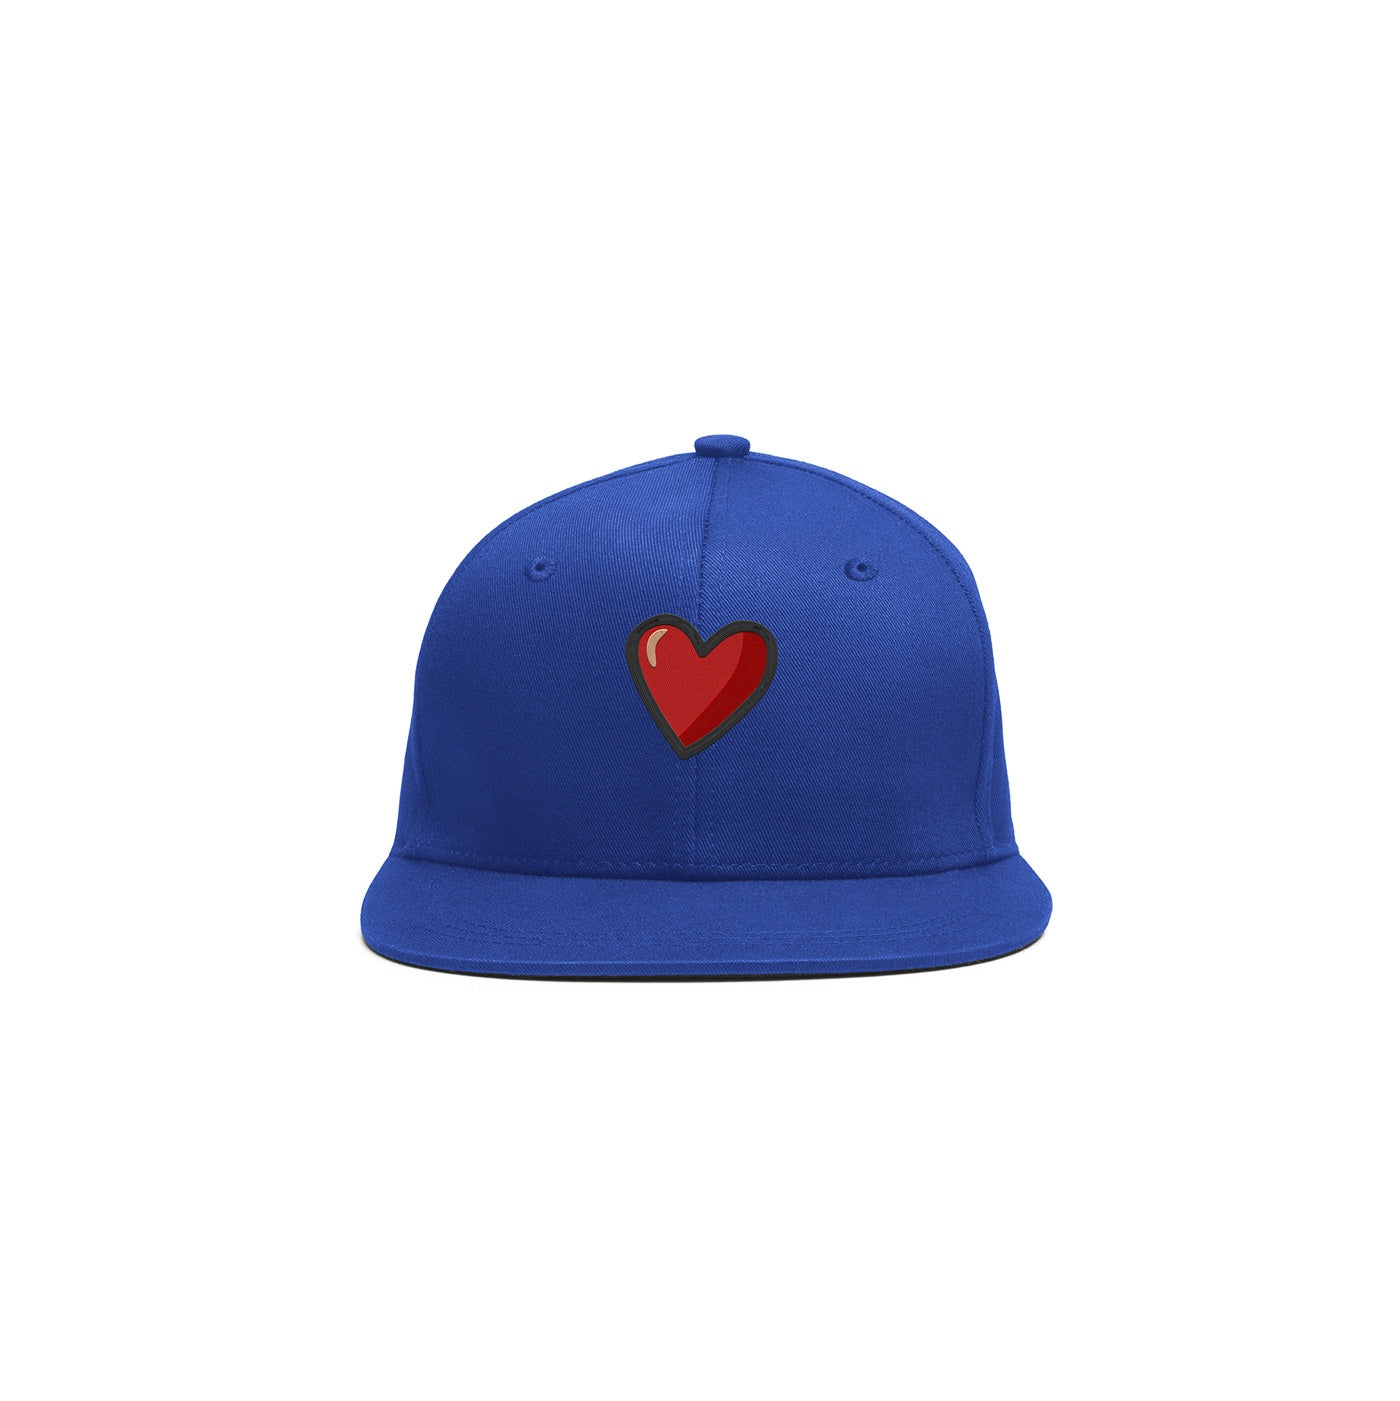 Embroidered My Heart Cap